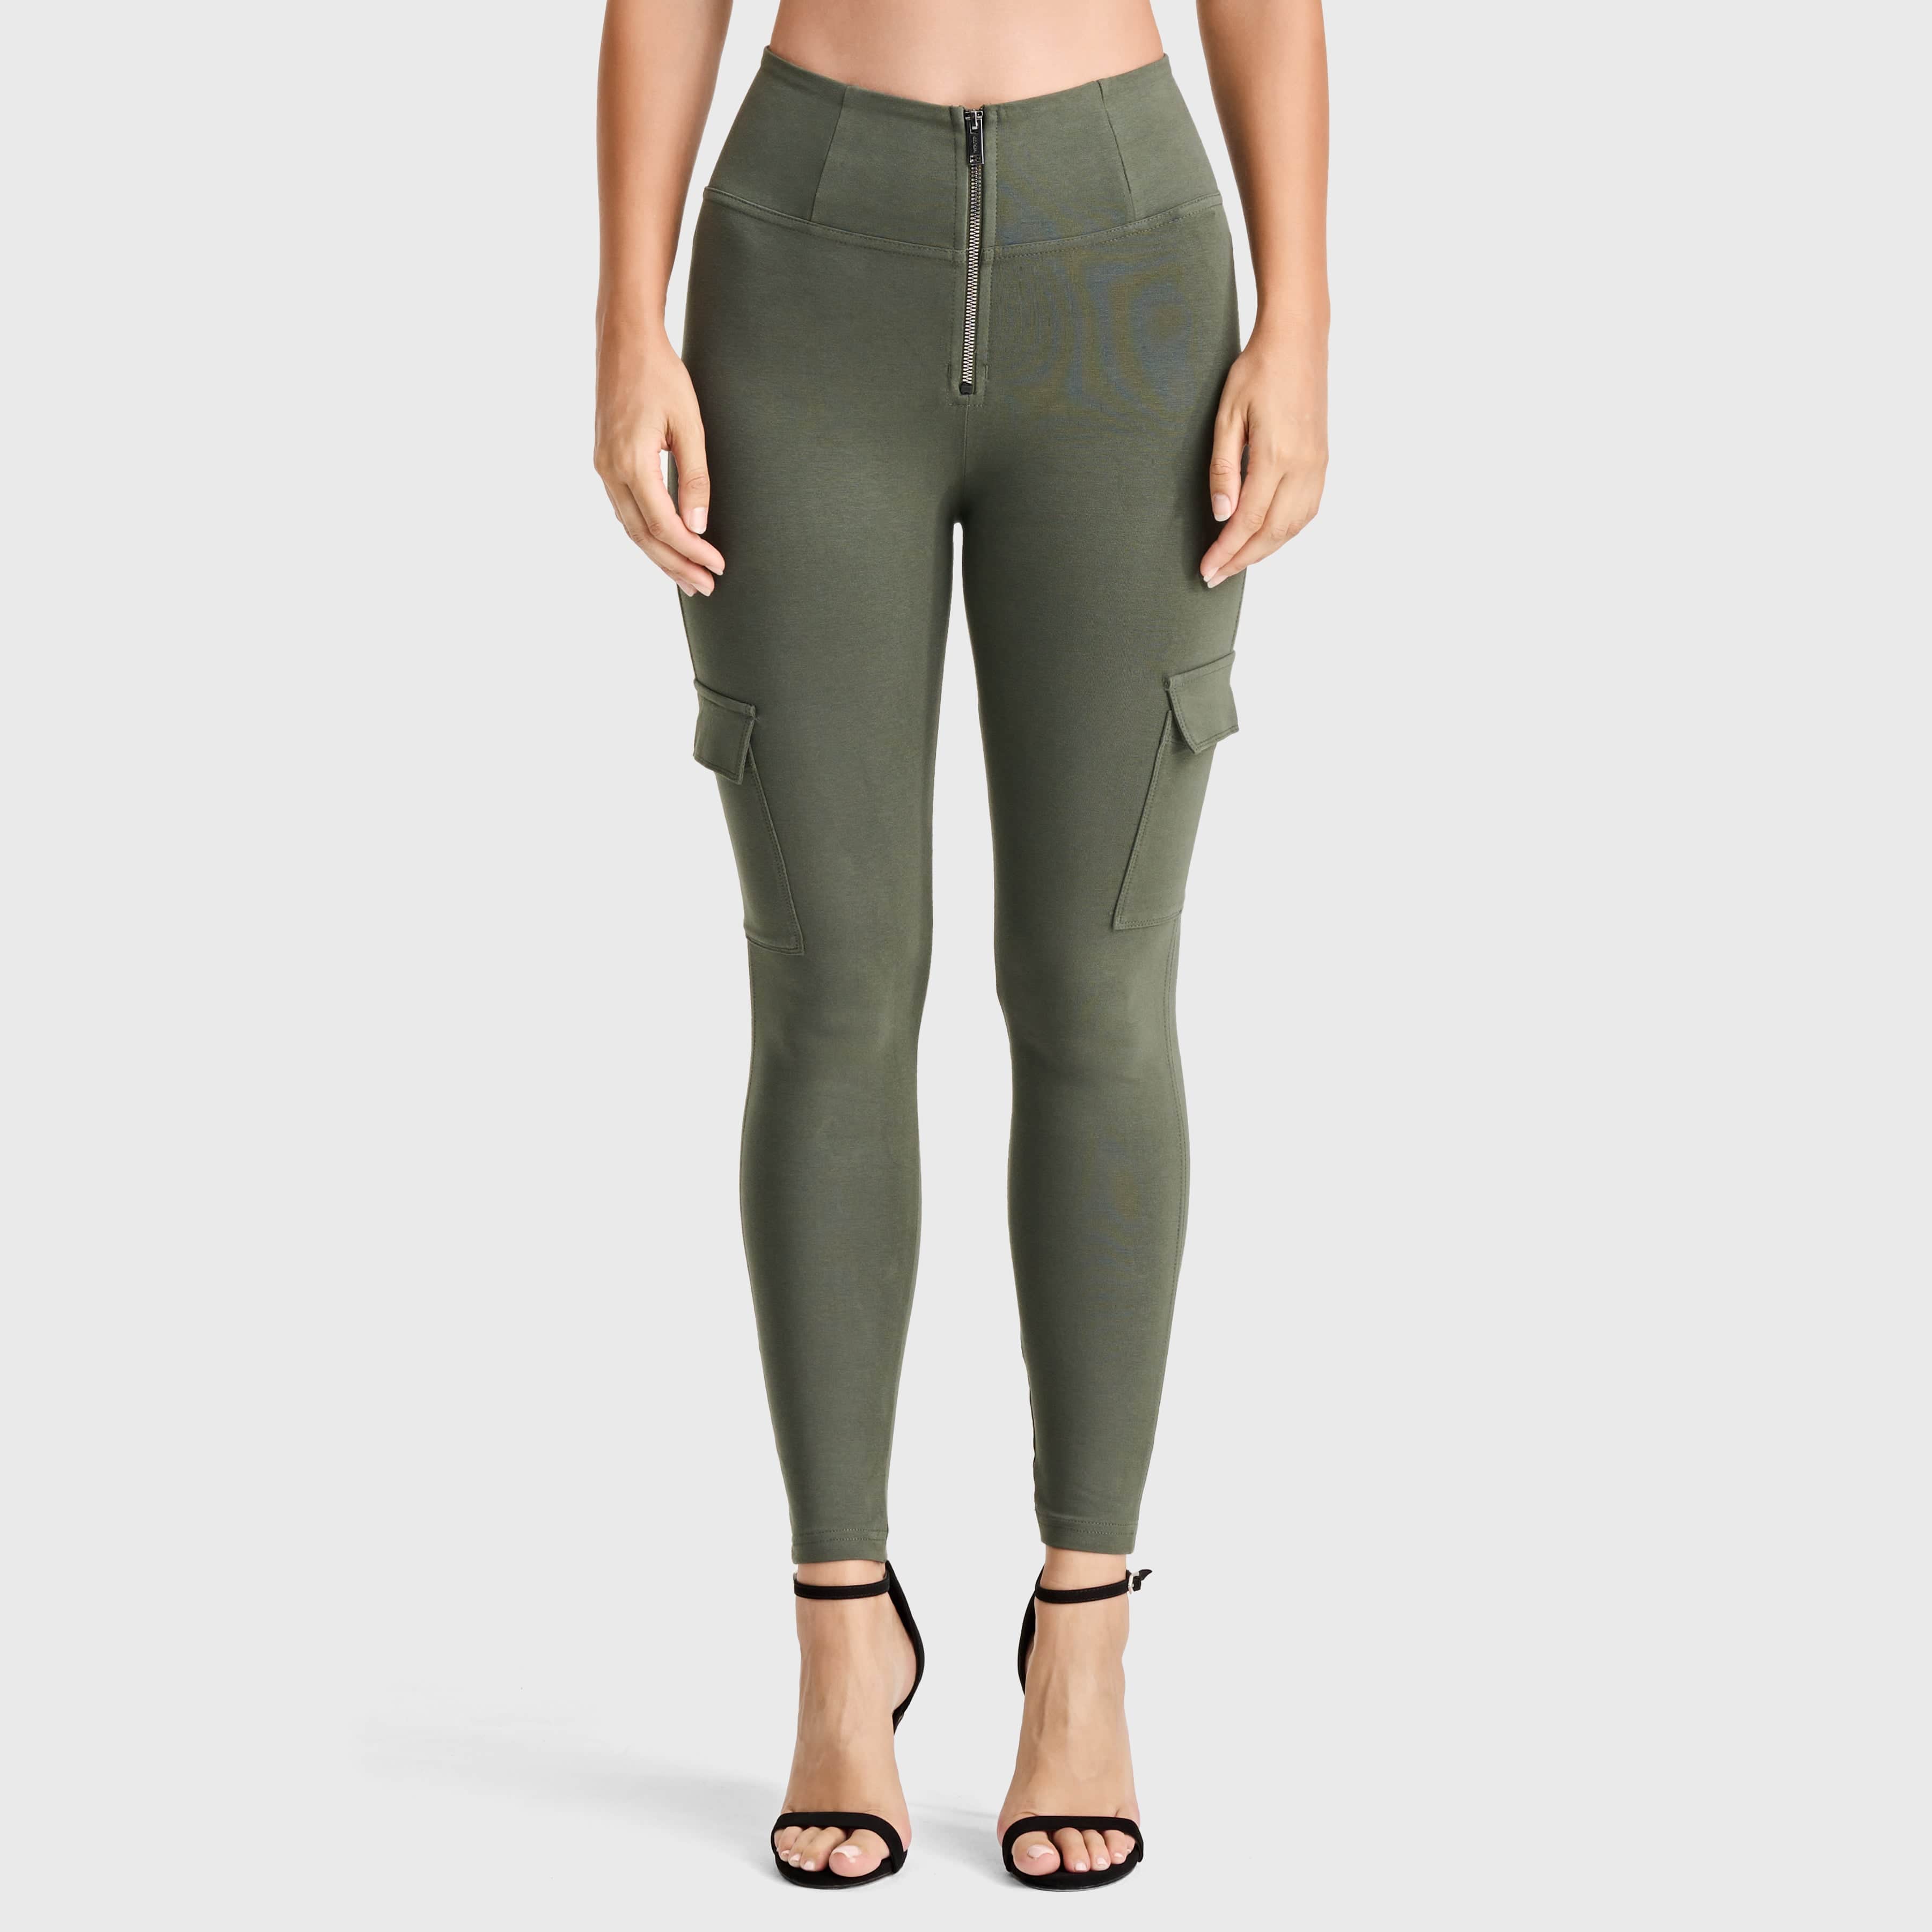 WR.UP® Cargo Fashion - High Waisted - 7/8 Length - Military Green 2